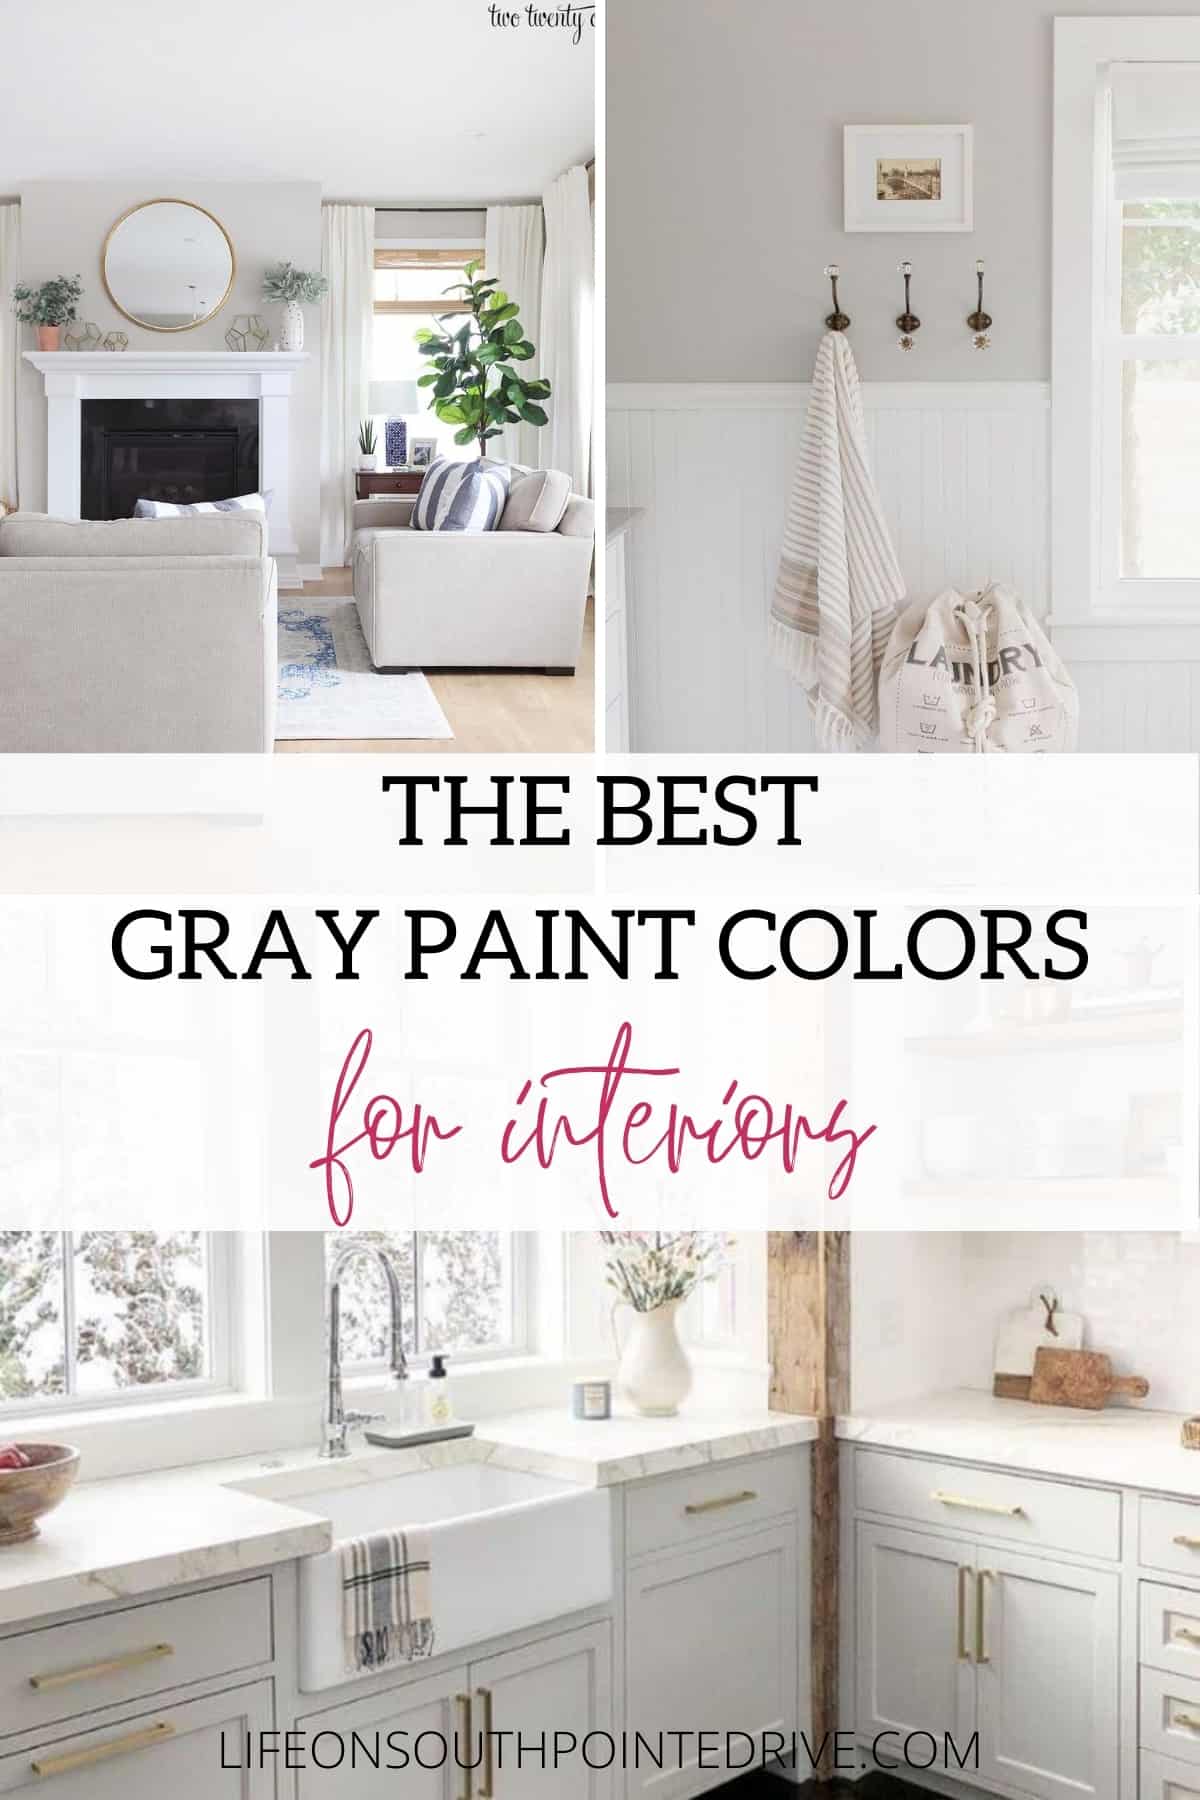 The Best Gray Paint Colors | Life on Southpointe Drive